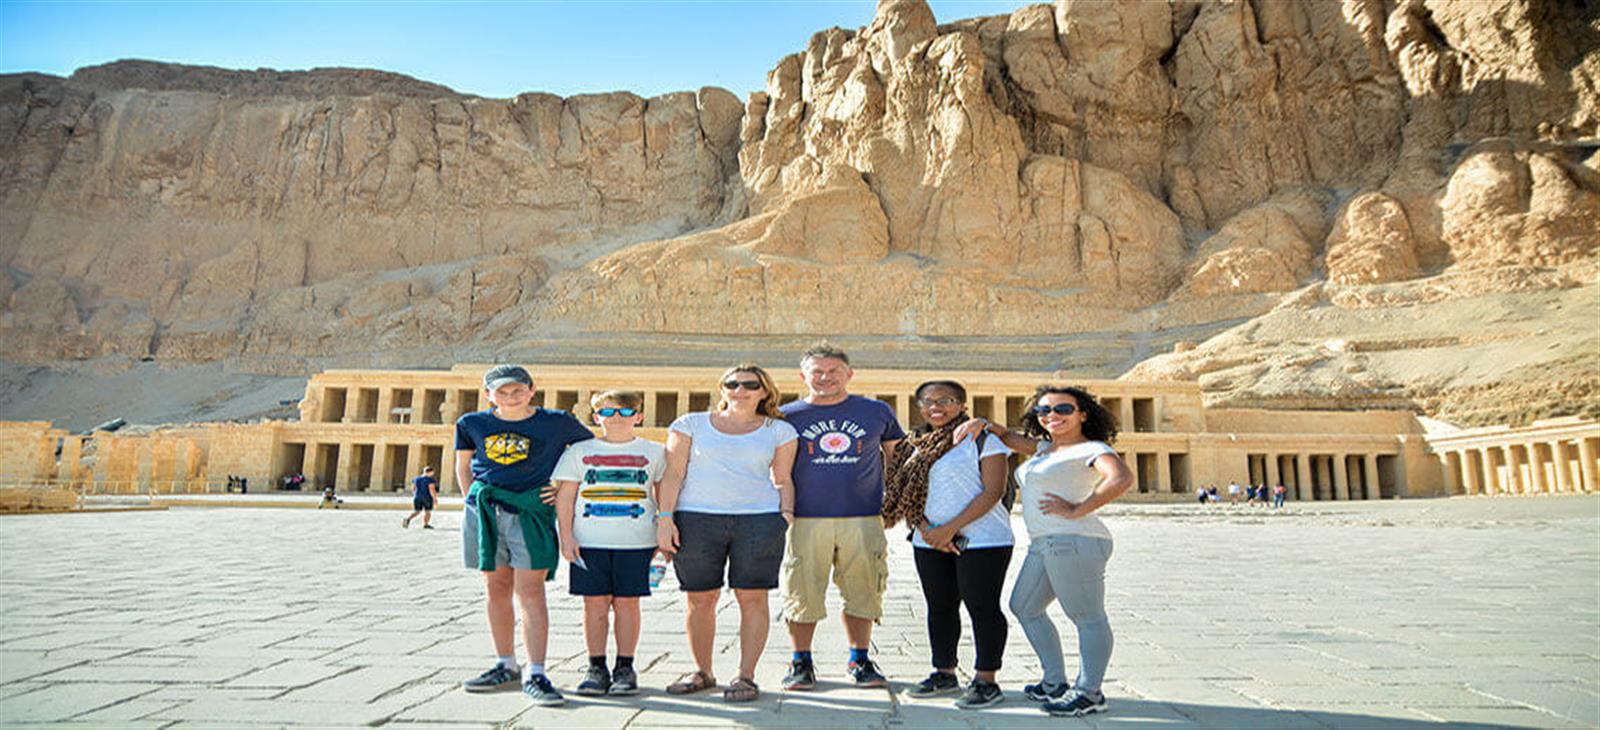 cairo luxor and abu simbel package 